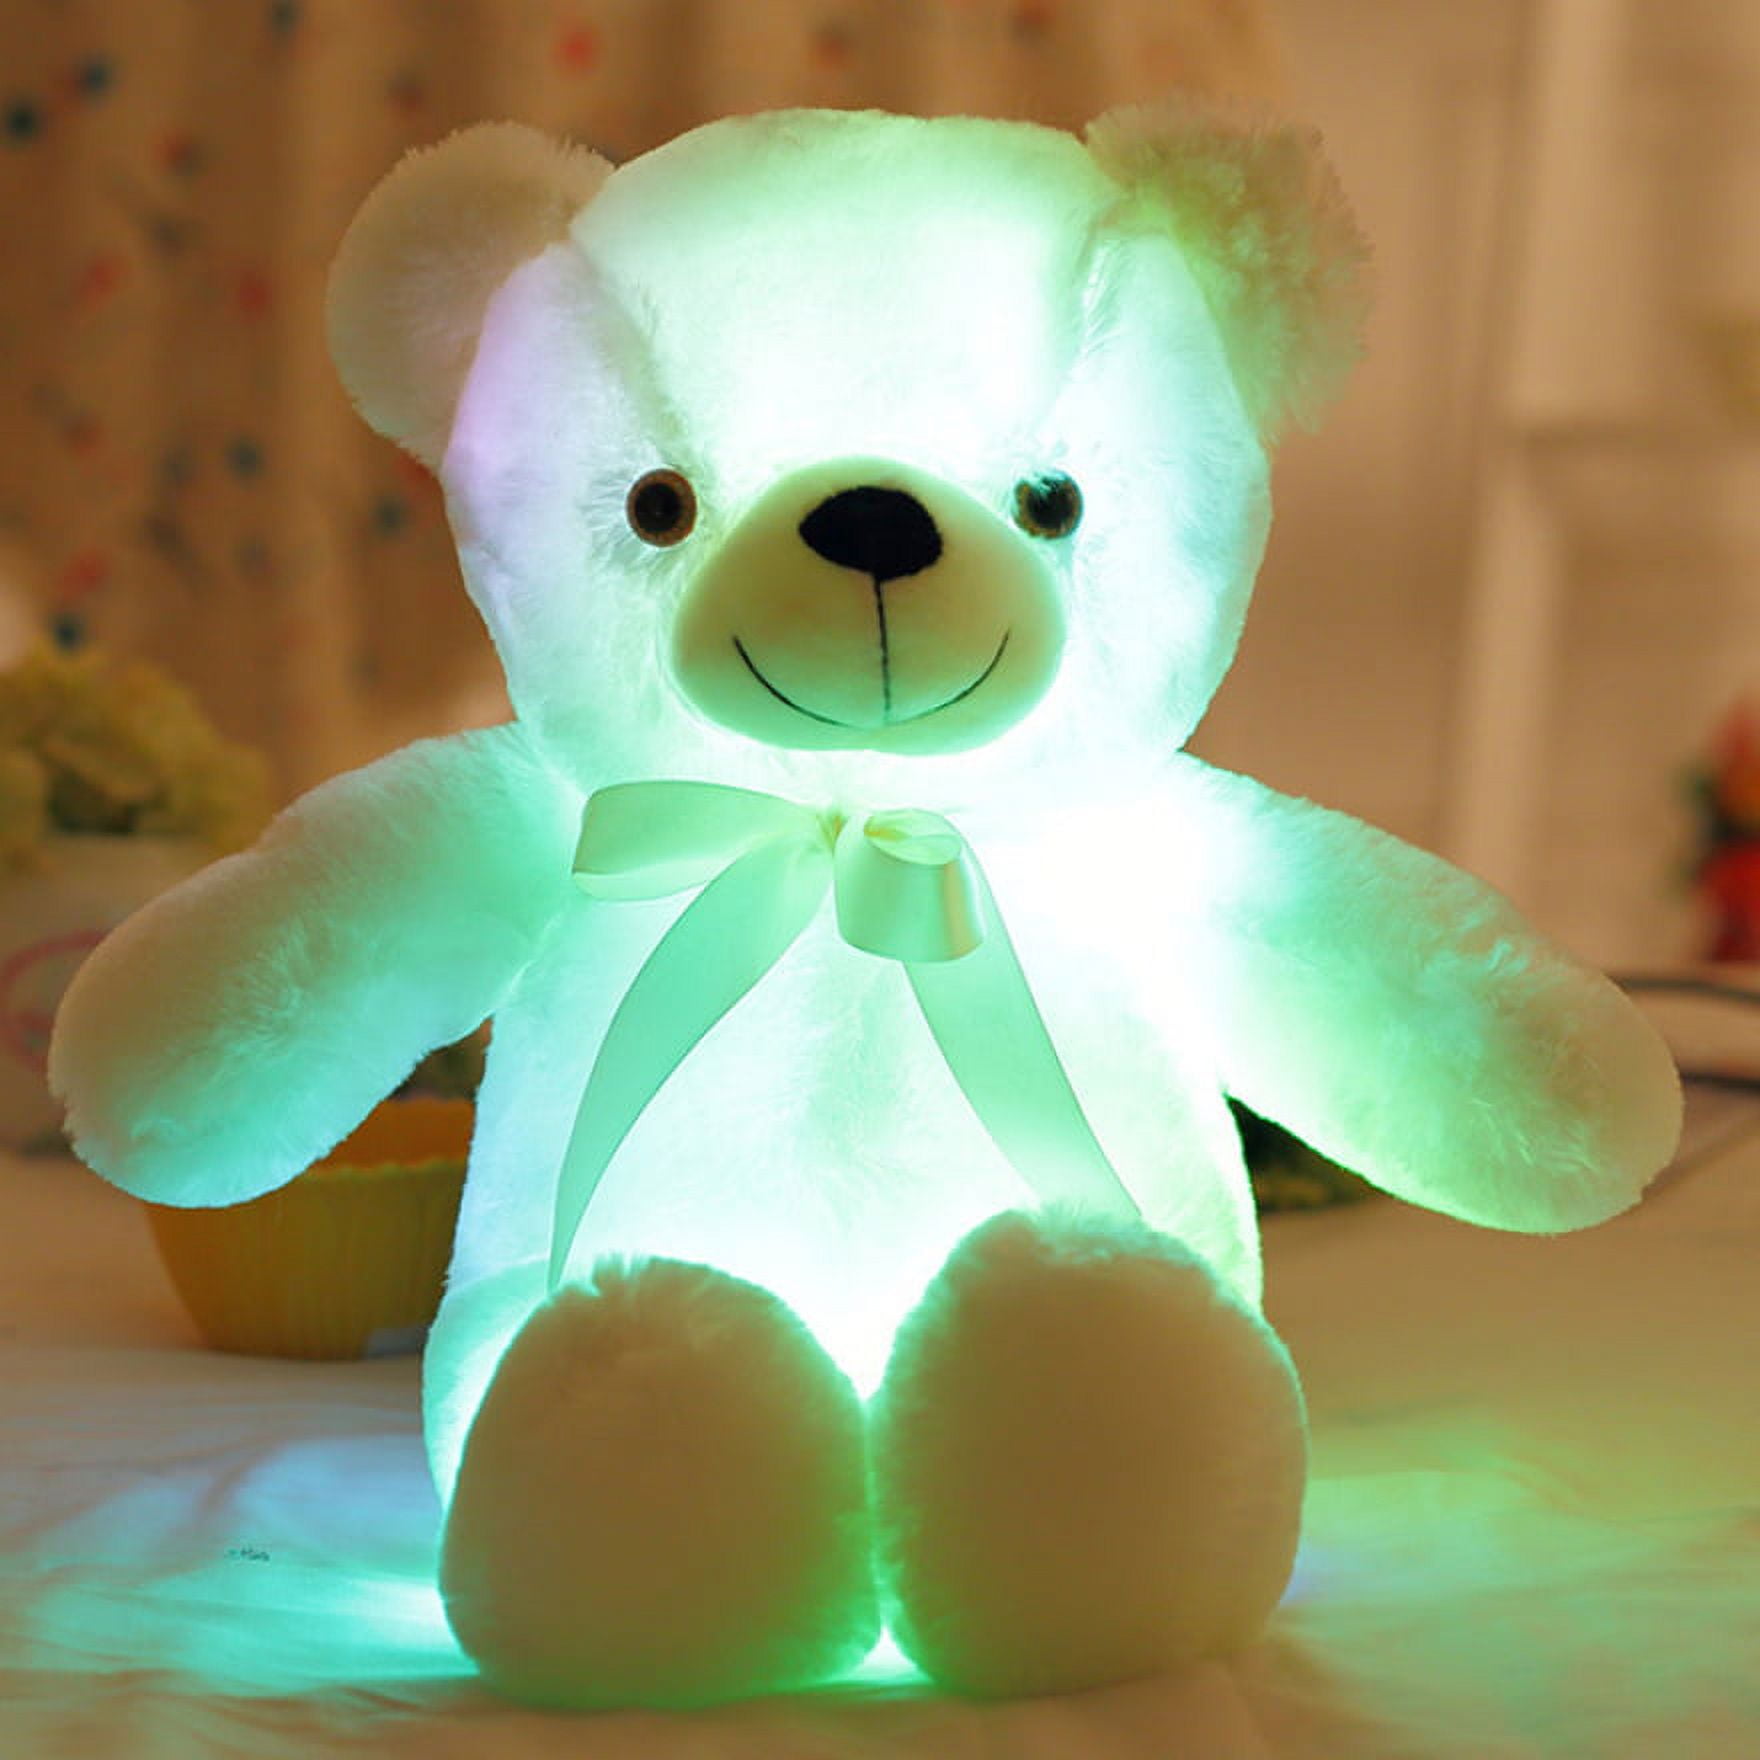 For Toy Adults Animal Up Glow Teddy Light Jzenzero with New Stuffed Plush Bow-tie Kids Creatives Soft Bear LED